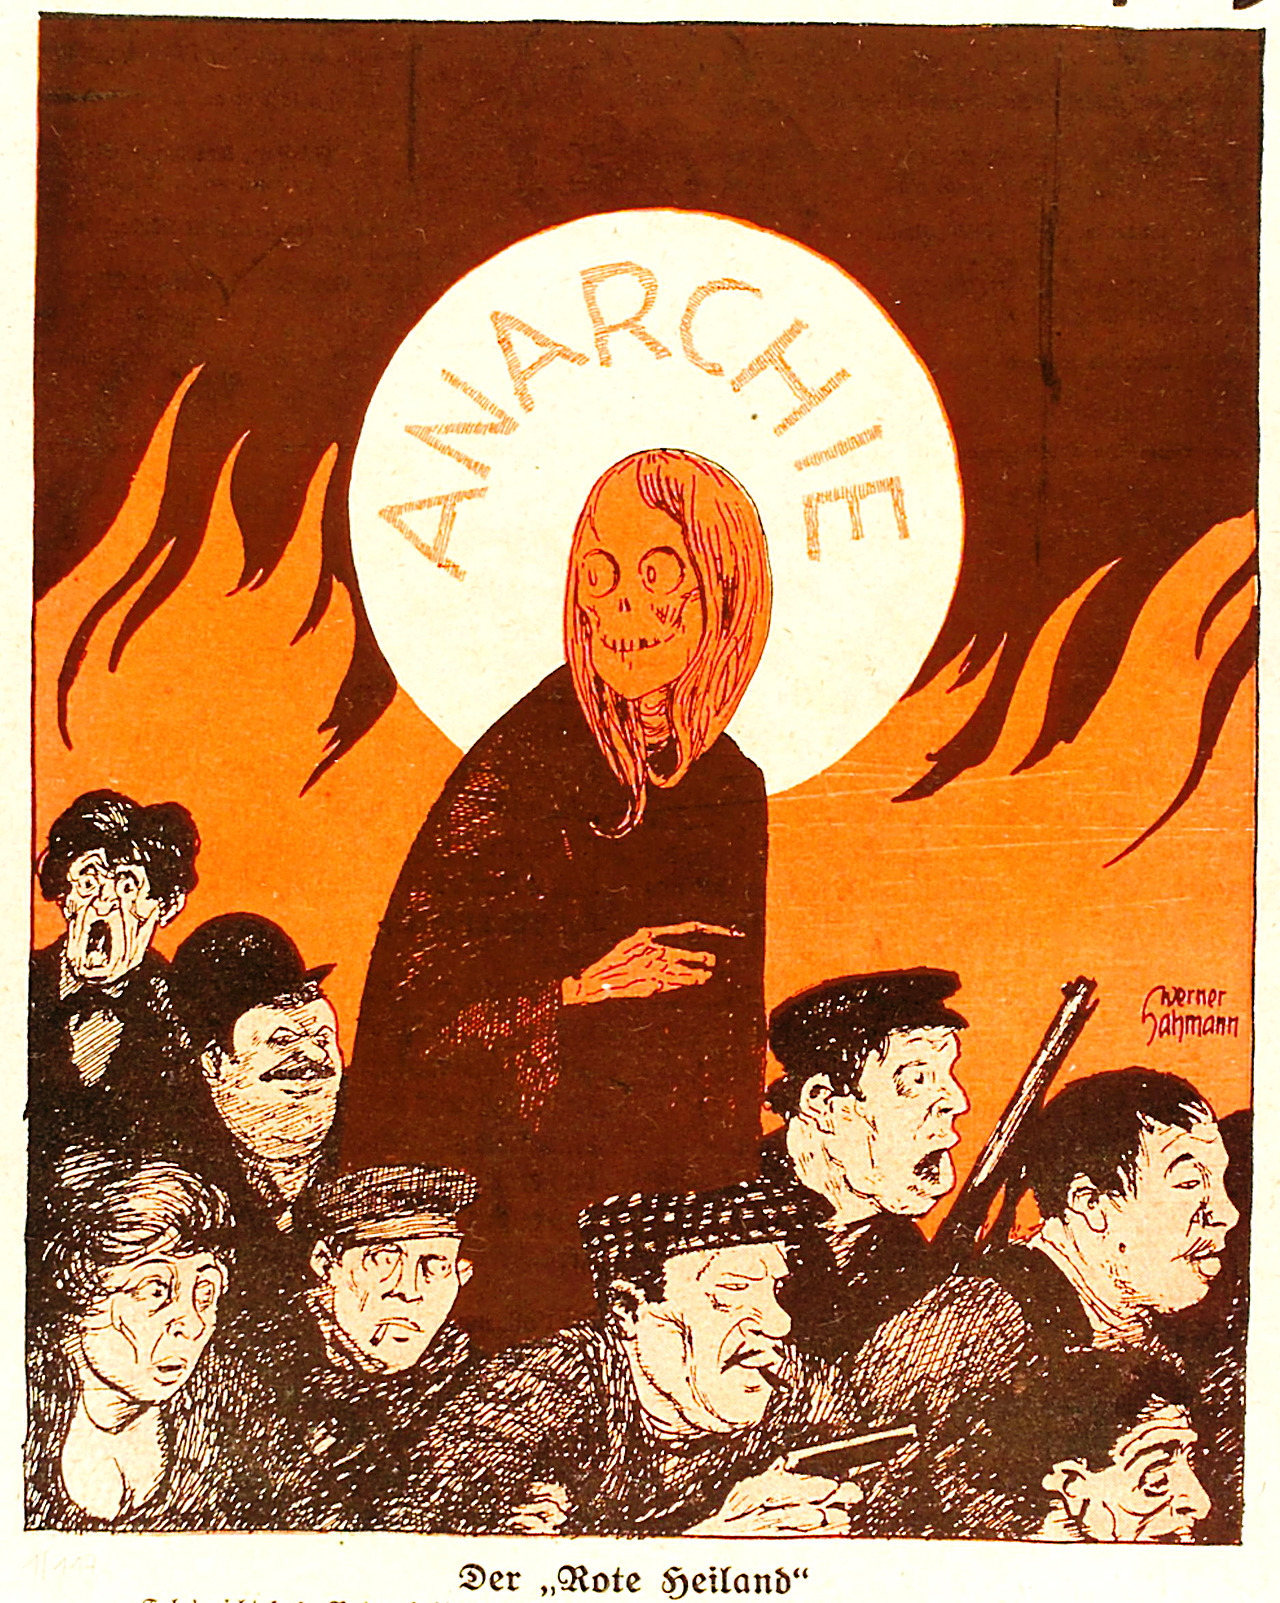 Werner Hahmann (1883-1977) cover, ’Der „Rote Heiland" (The Red Savior), “Kladderadatsch”, #16, April 1920
Source
An anti-socialist/anarchist cartoon, warning people away from the “dangerous road of radicalism.”